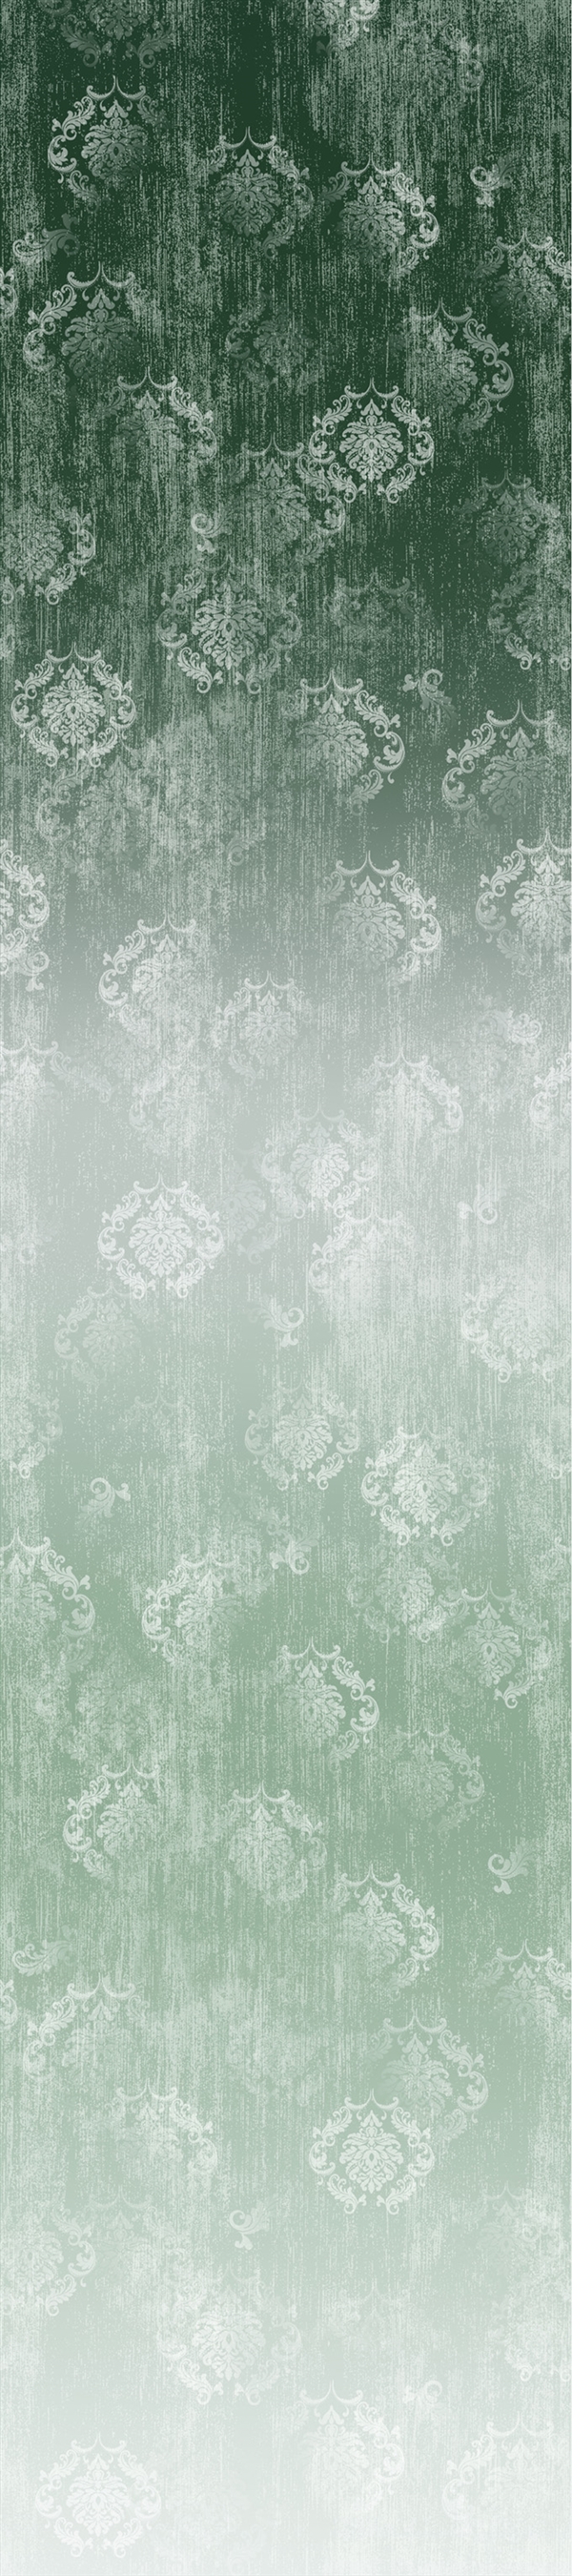 Timeless ombre digital print fabric in green gray tones